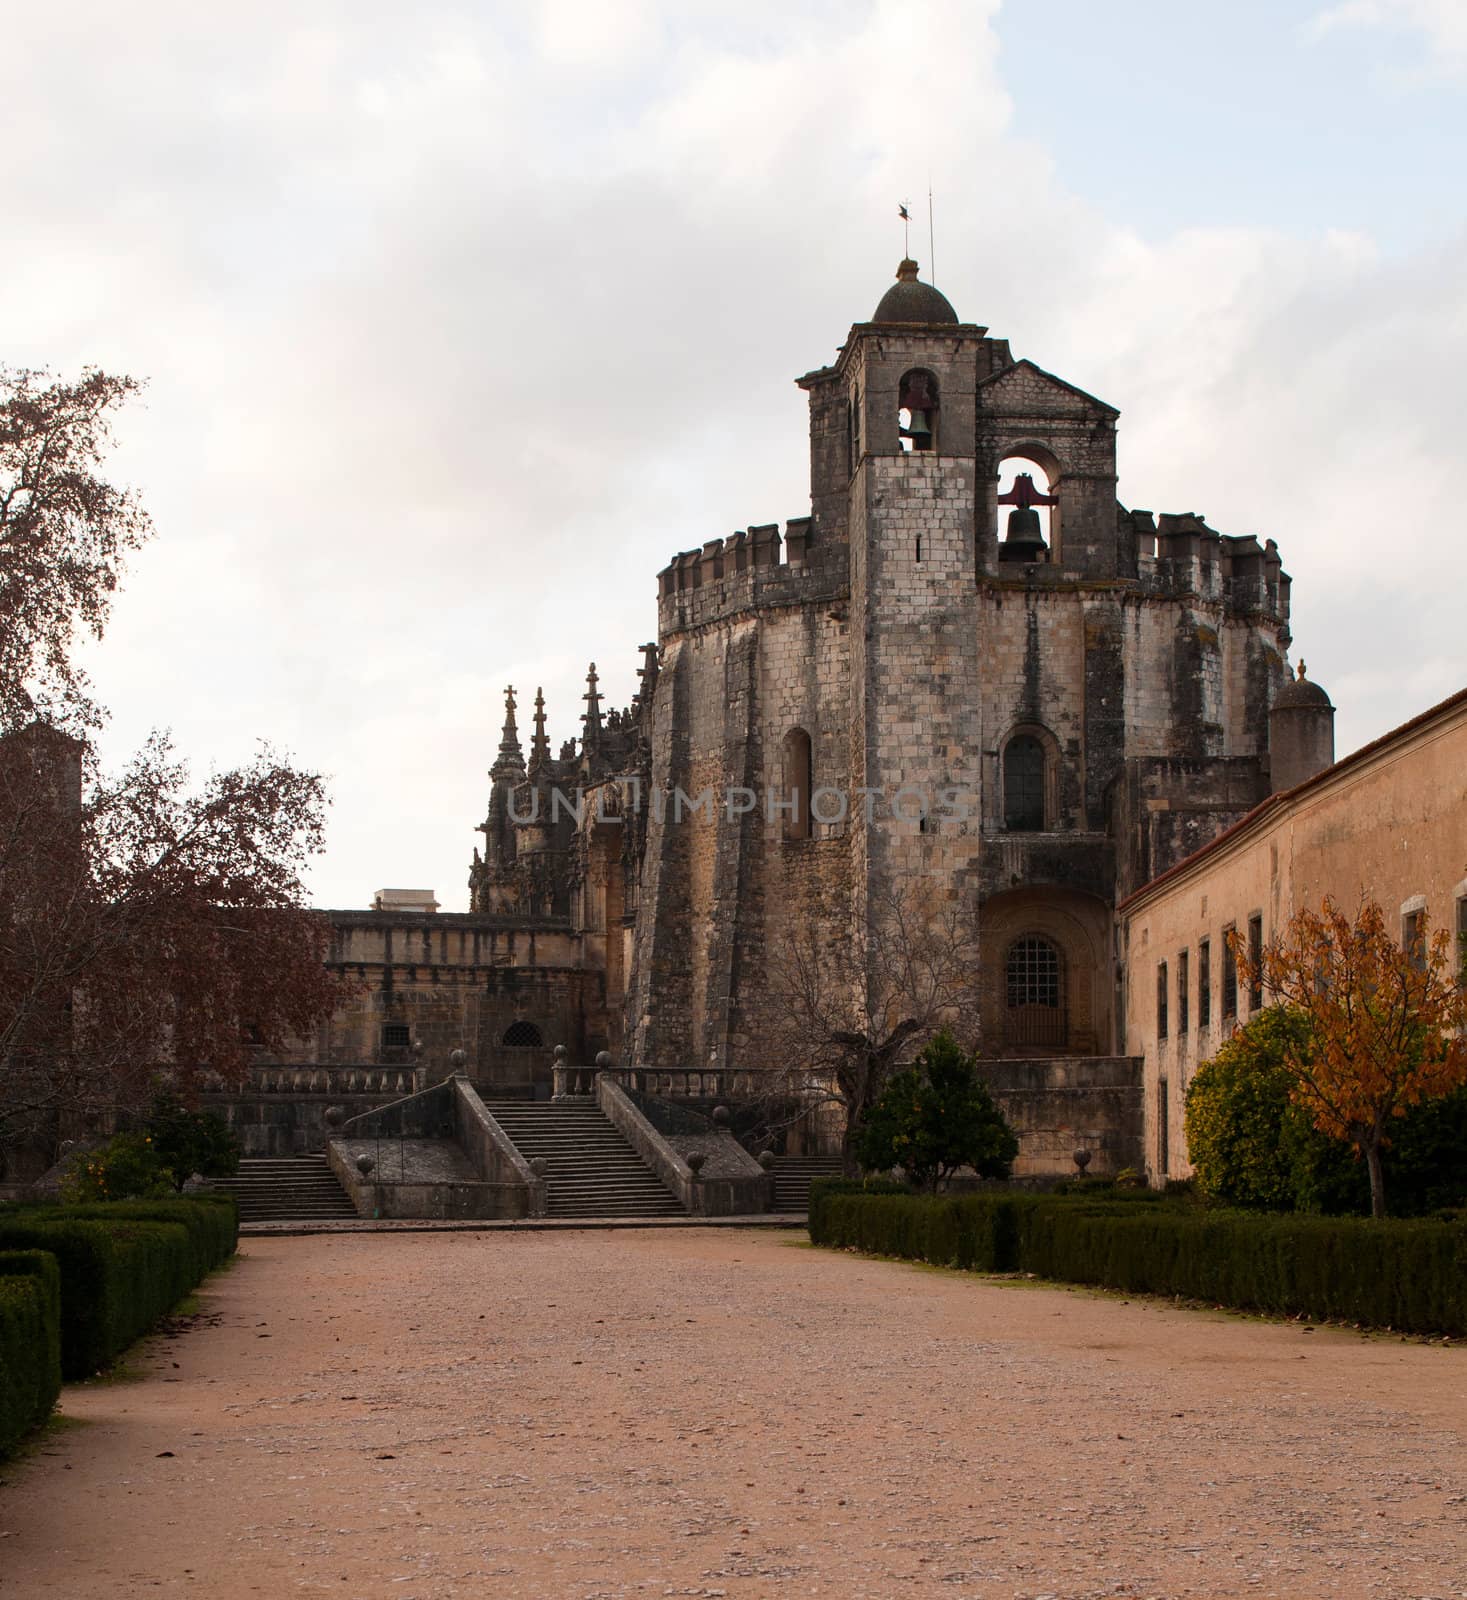 Templar Church at the Convent of Christ in Tomar, Portugal (build in the 12th century, UNESCO World Heritage)